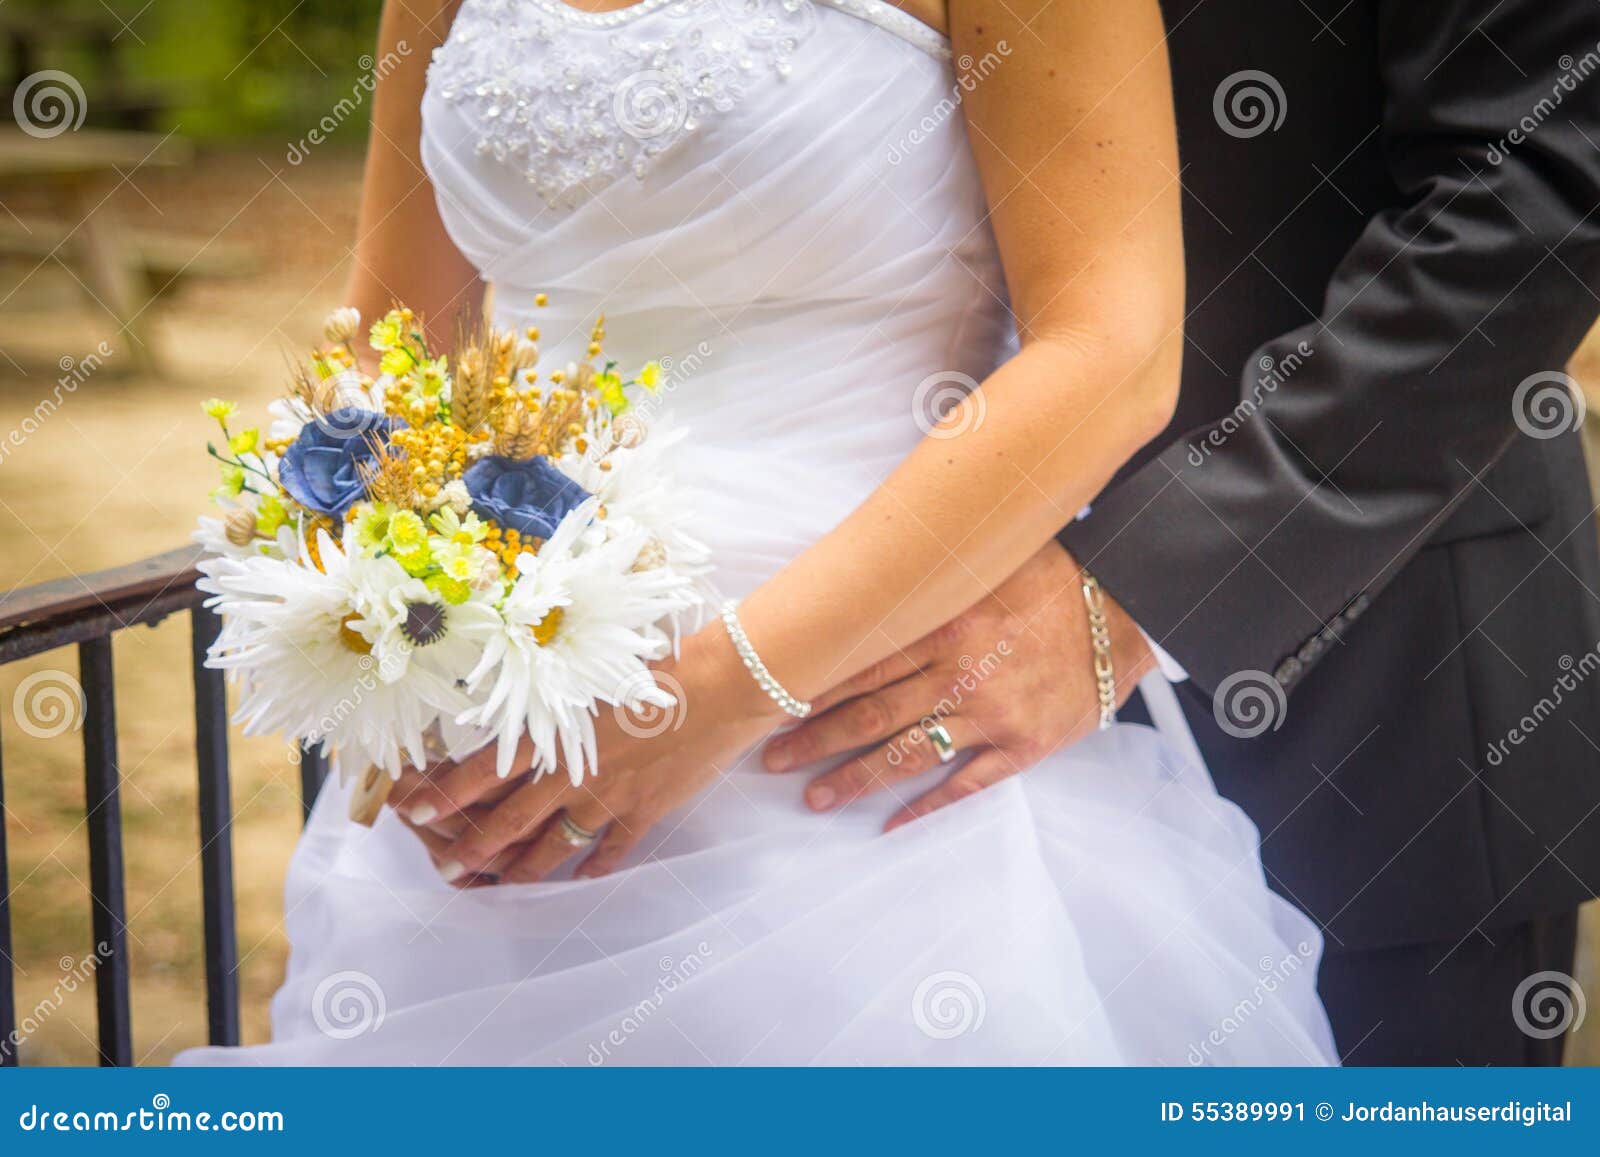 Bride and Groom Posing with Flowers Stock Image - Image of family ...